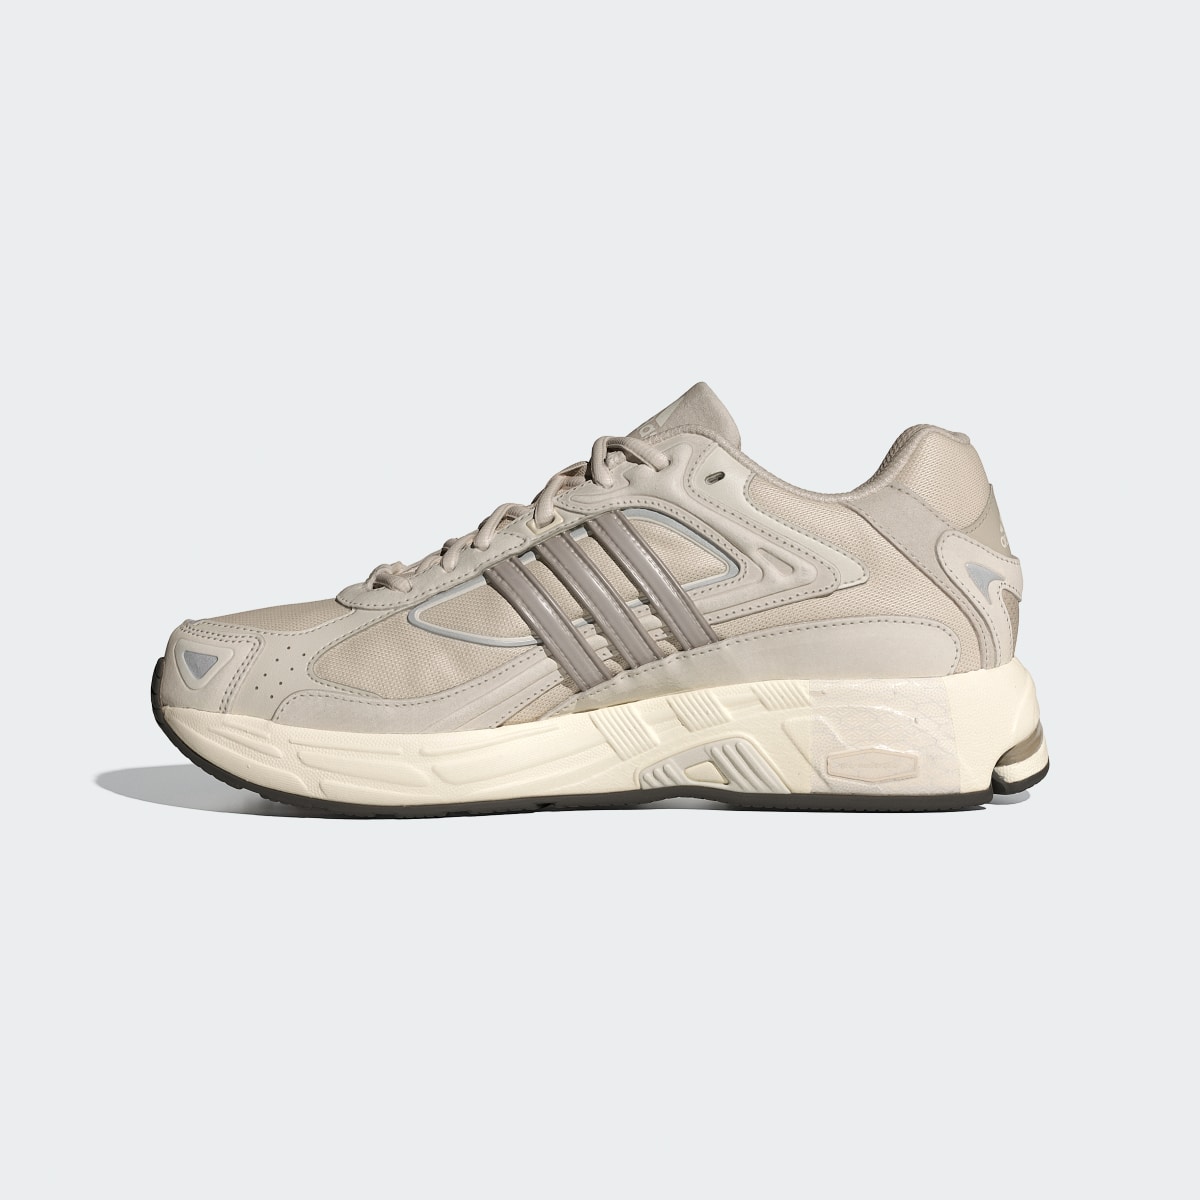 Adidas Chaussure Response CL. 6